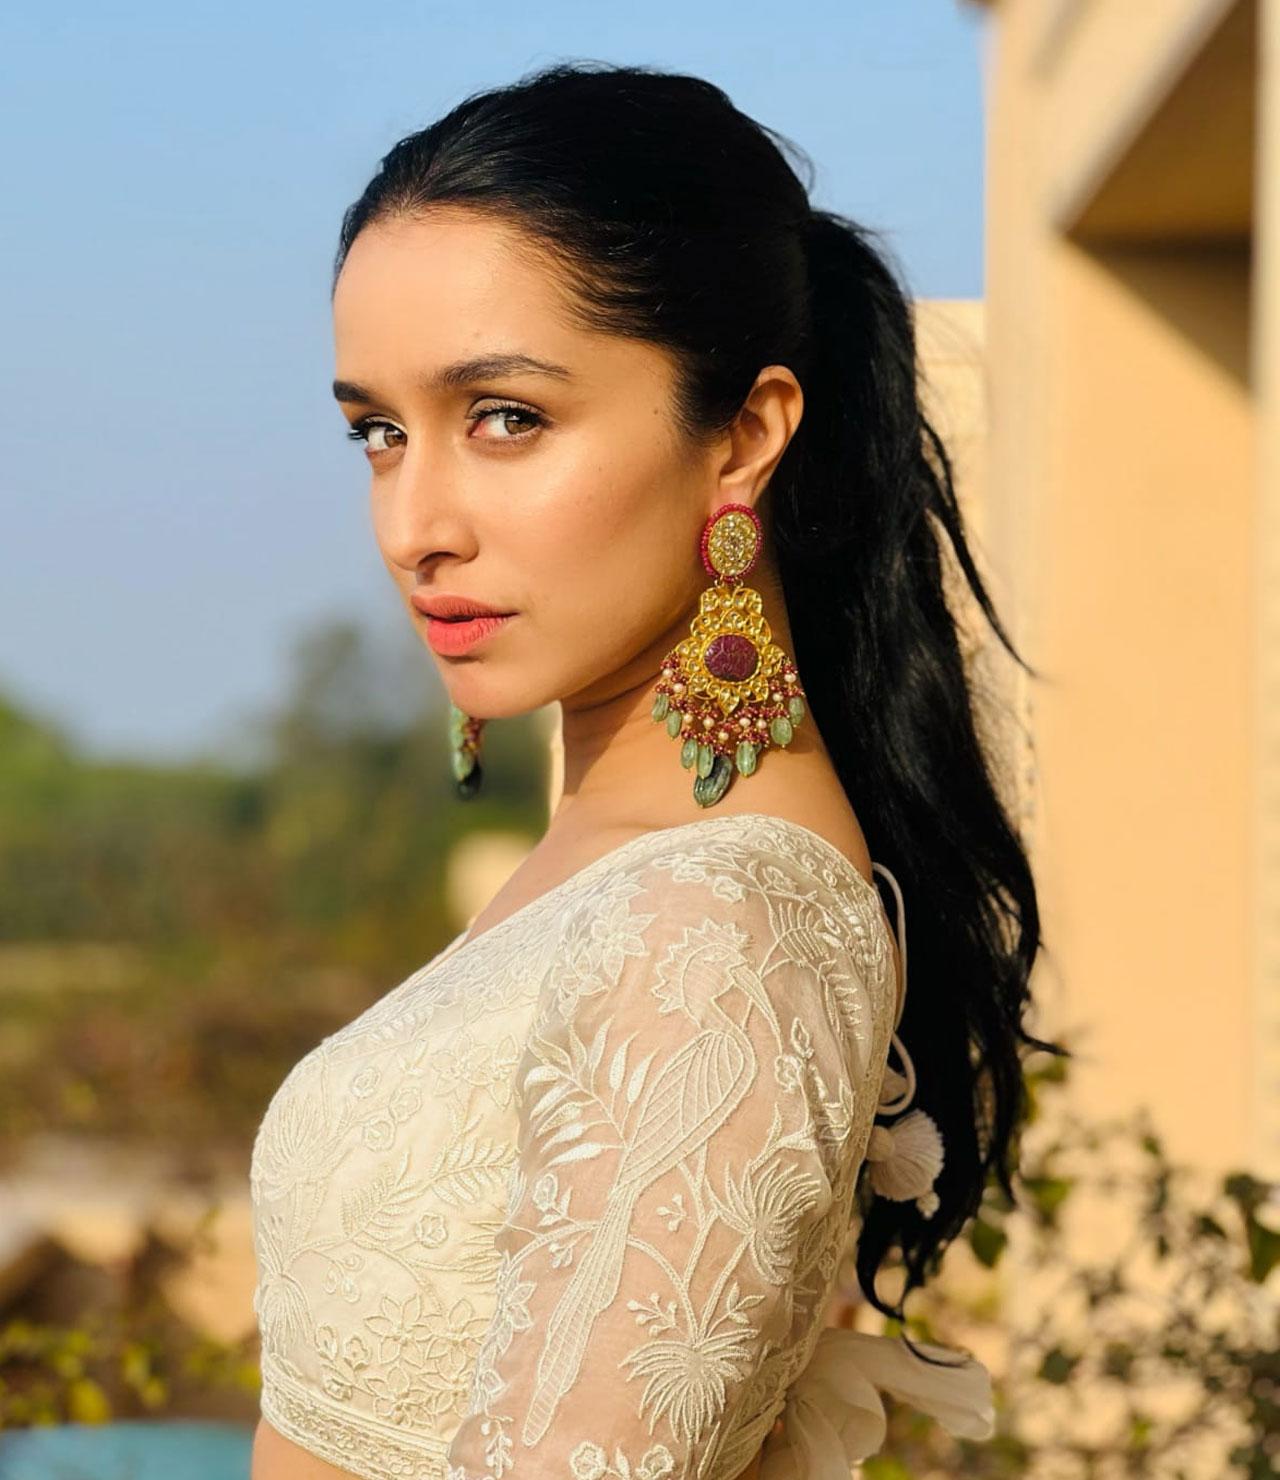 The star oozed oomph in an off white ivory lehenga, with a plunging neckline. She tied up her hair in a high ponytail, with statement chandbaali, which overall complimented her look.